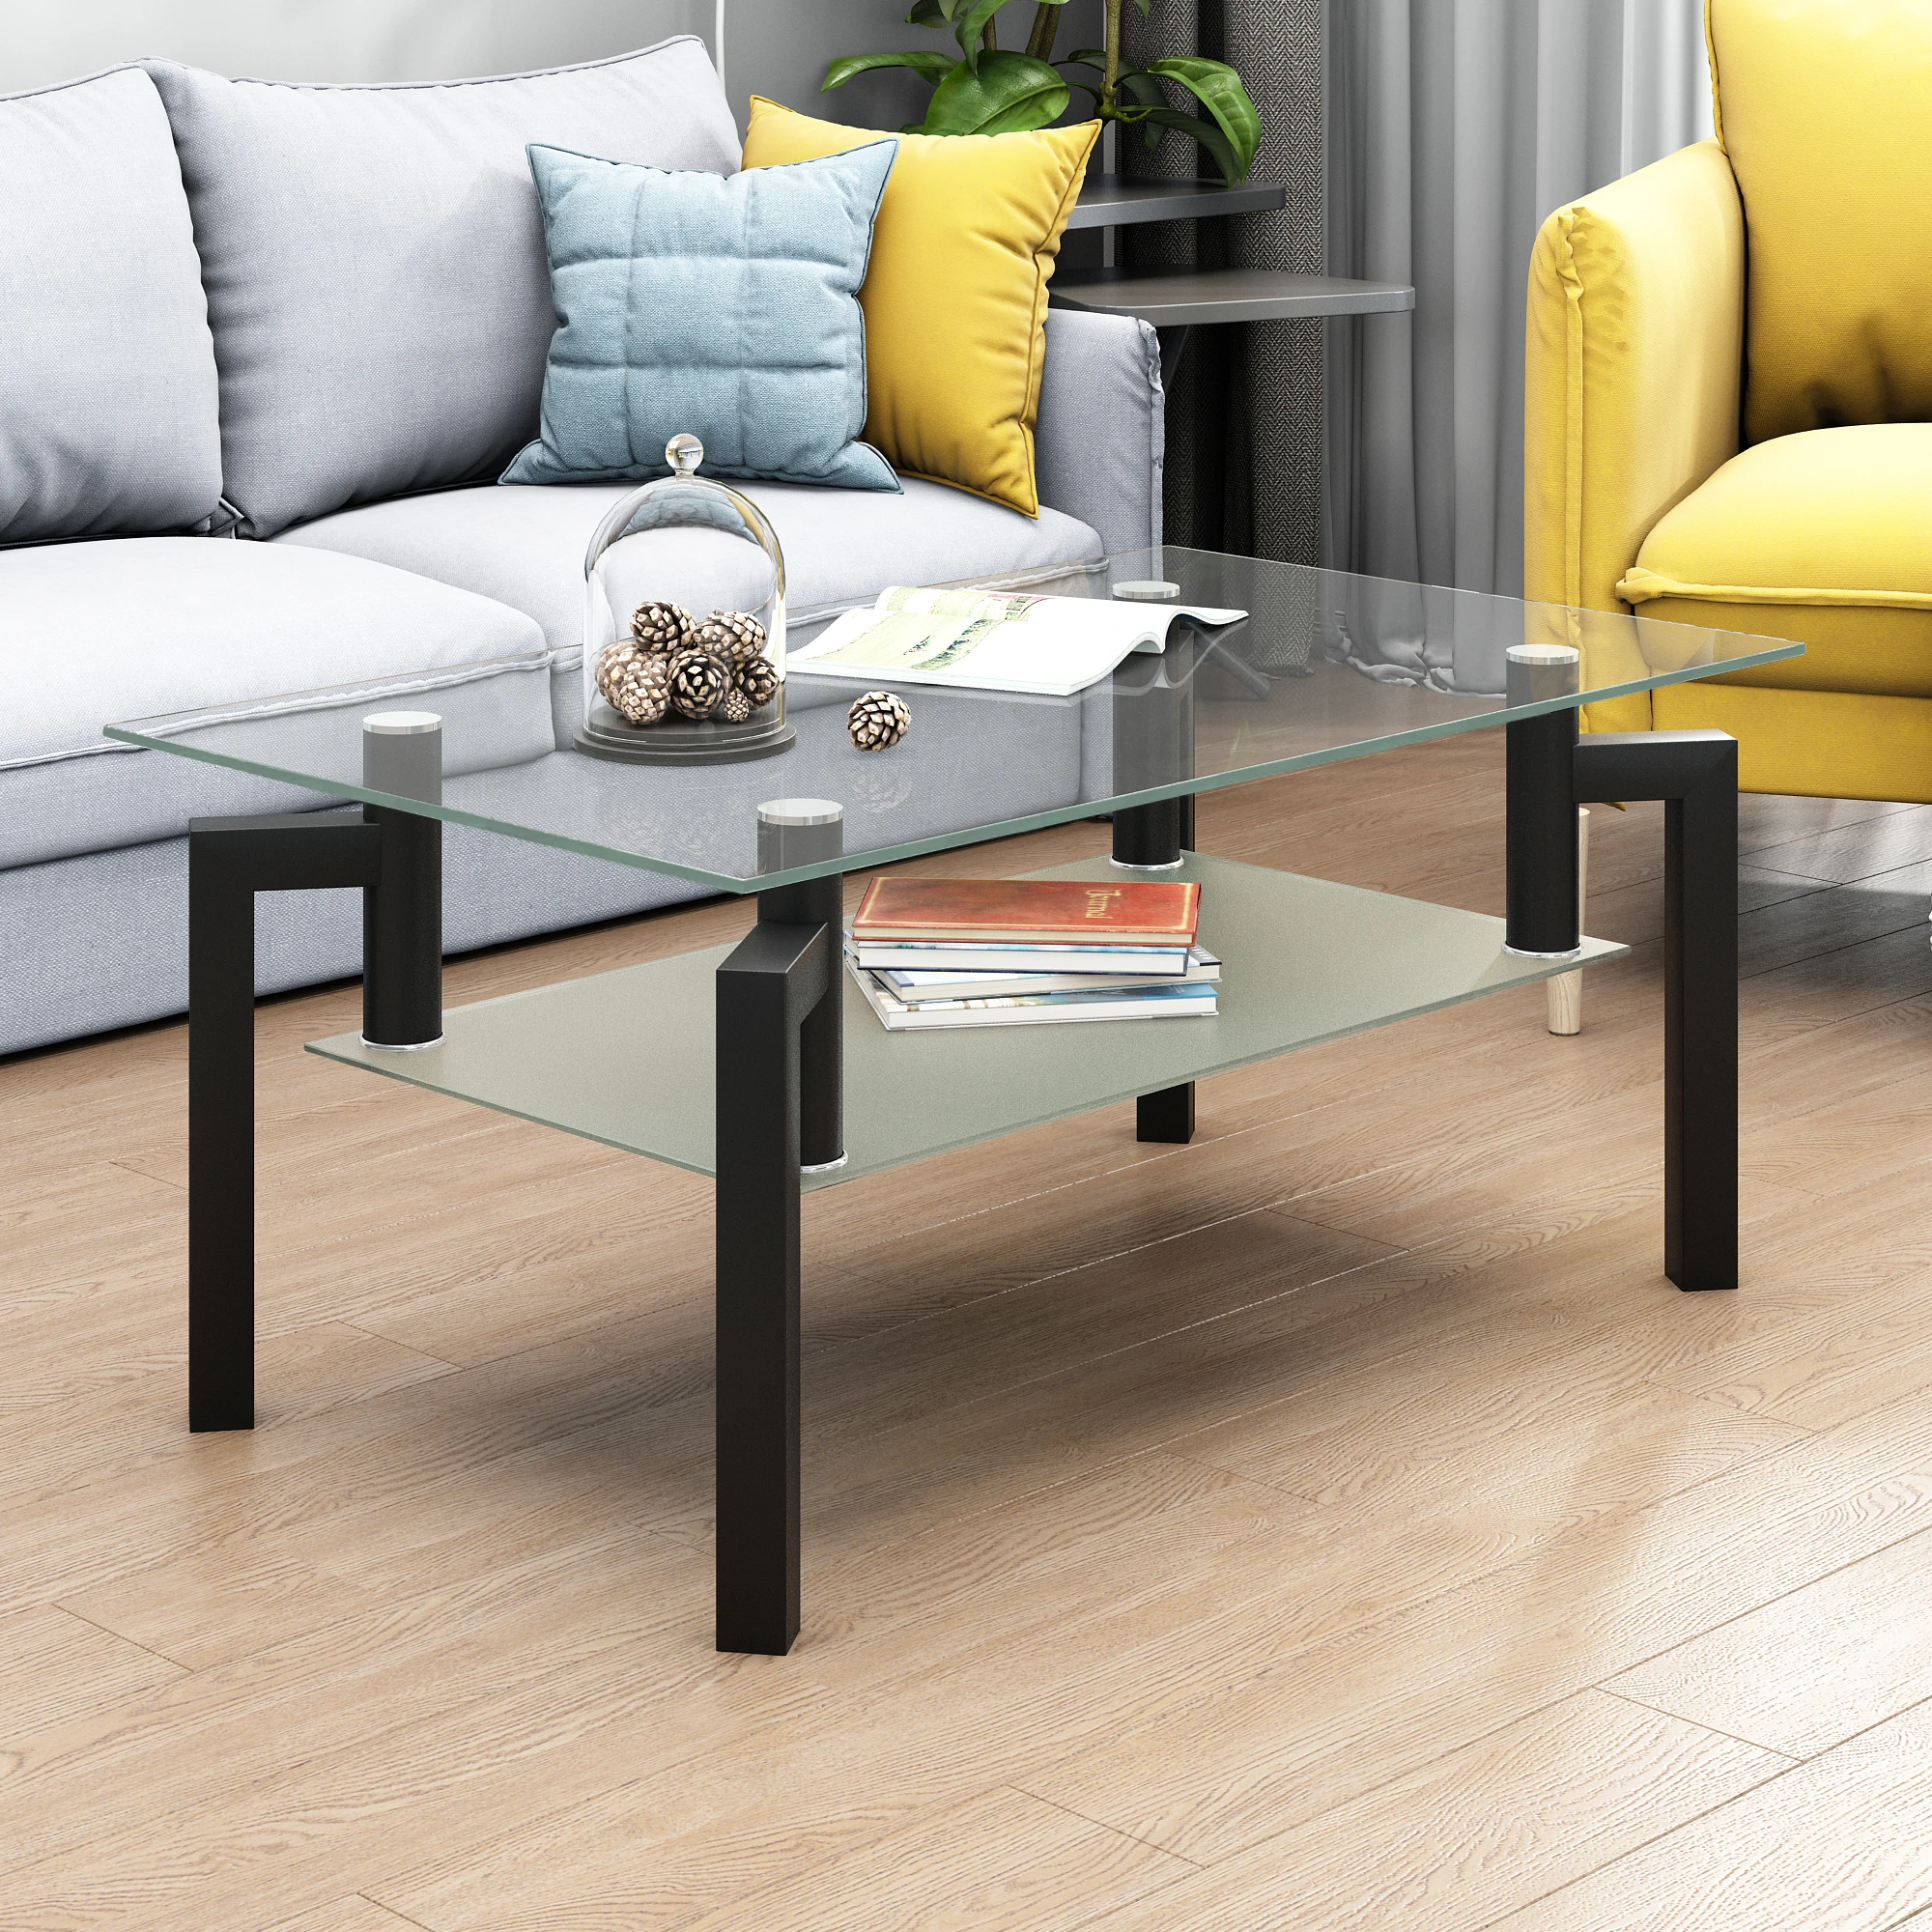 

Rectangle Glass Coffee Table Clear Tea Table Modern Side Center Tables Black Legs 100x60x44CM Living Room Furniture[US-W]